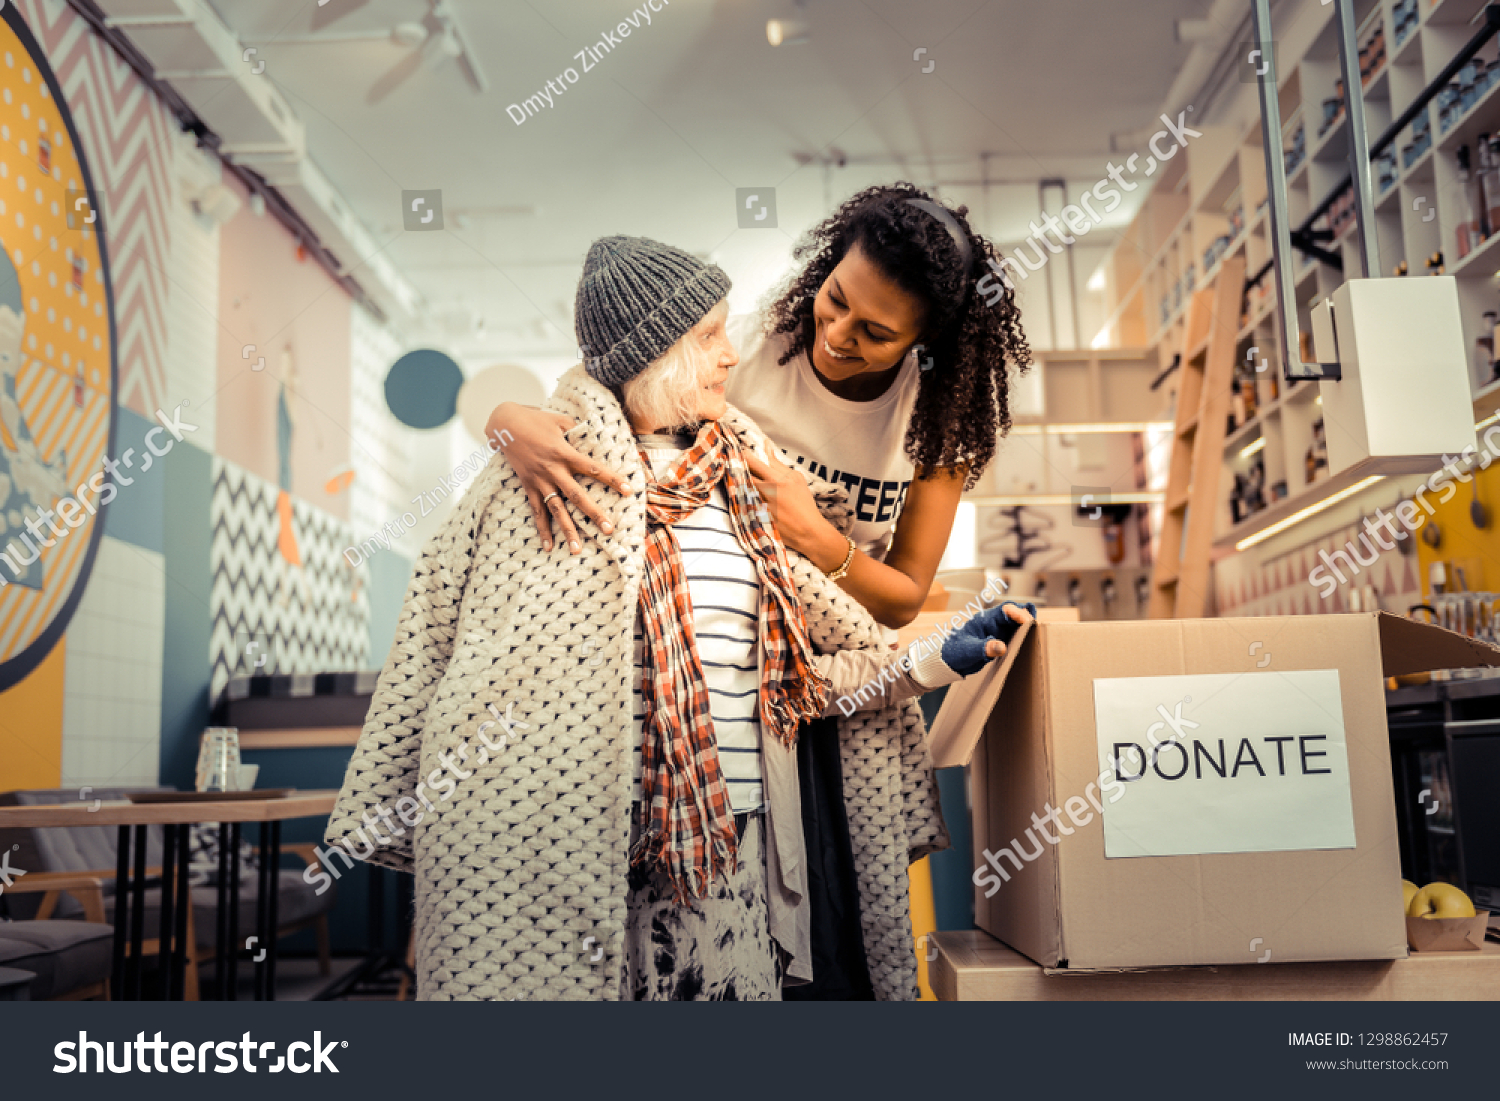 You need it. Nice joyful woman smiling while giving her old coat to a pleasant aged woman #1298862457